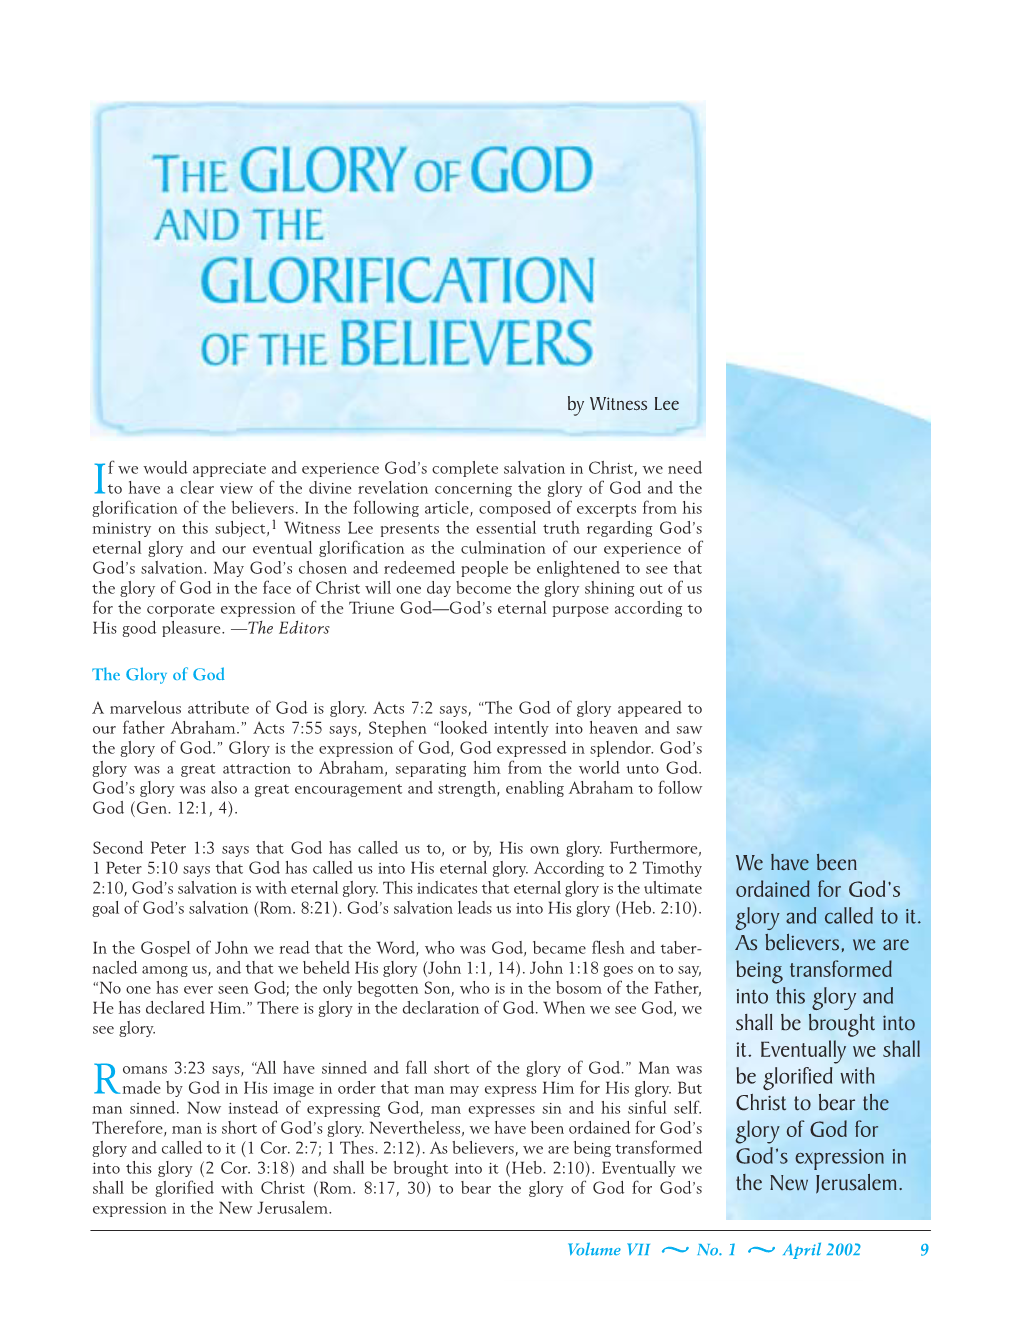 The Glory of God and the Glorification of the Believers